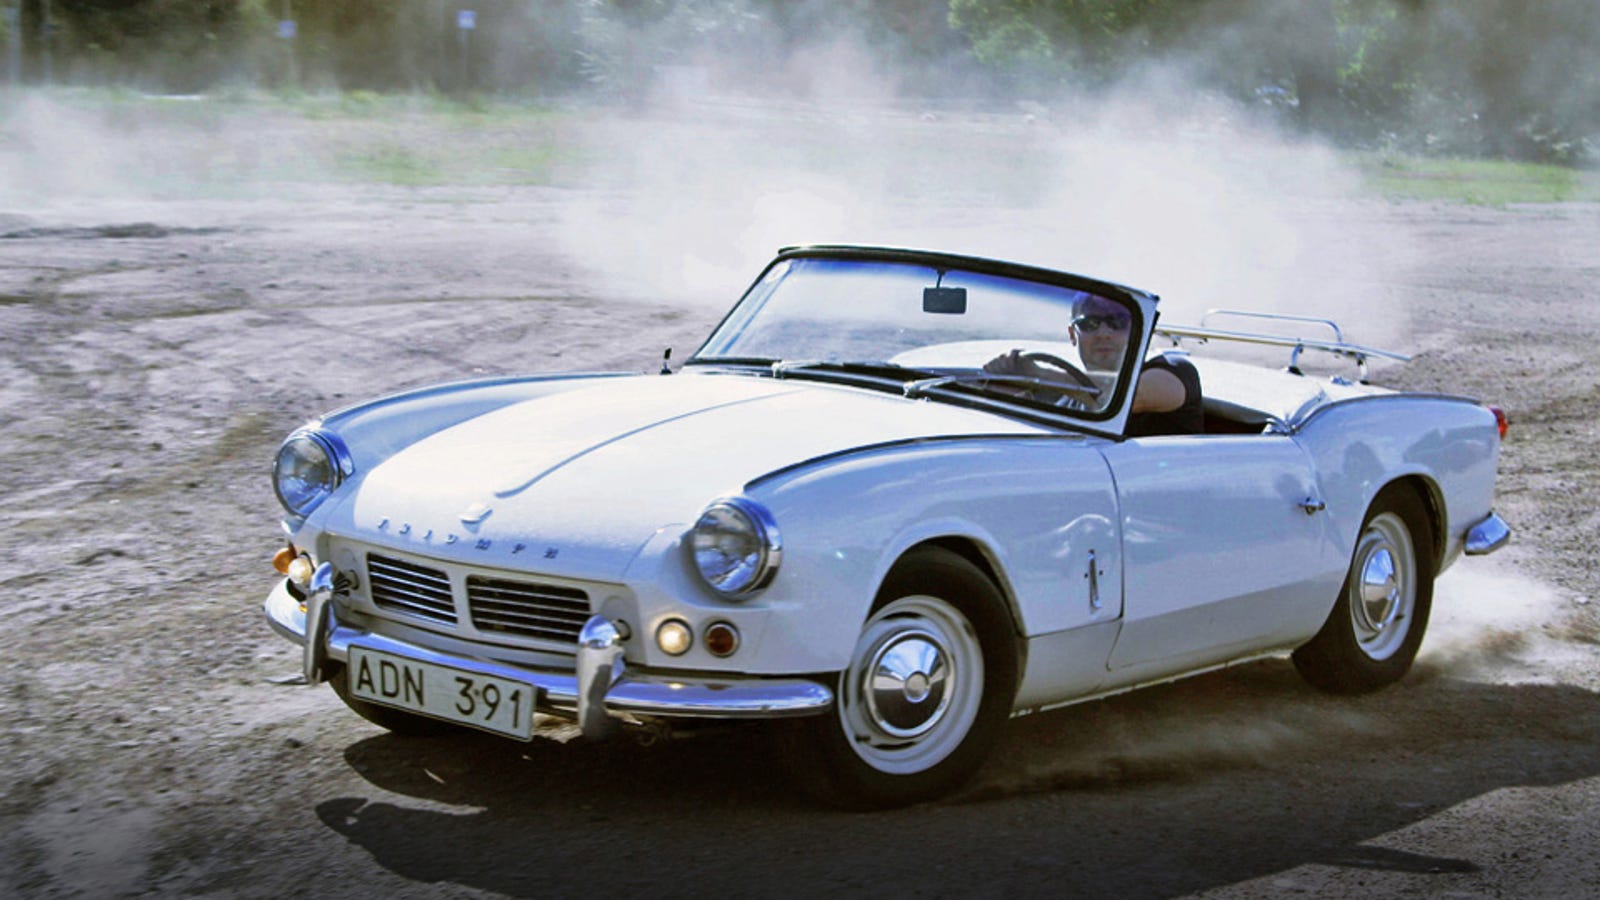 The ten best entry-level sports cars of all time